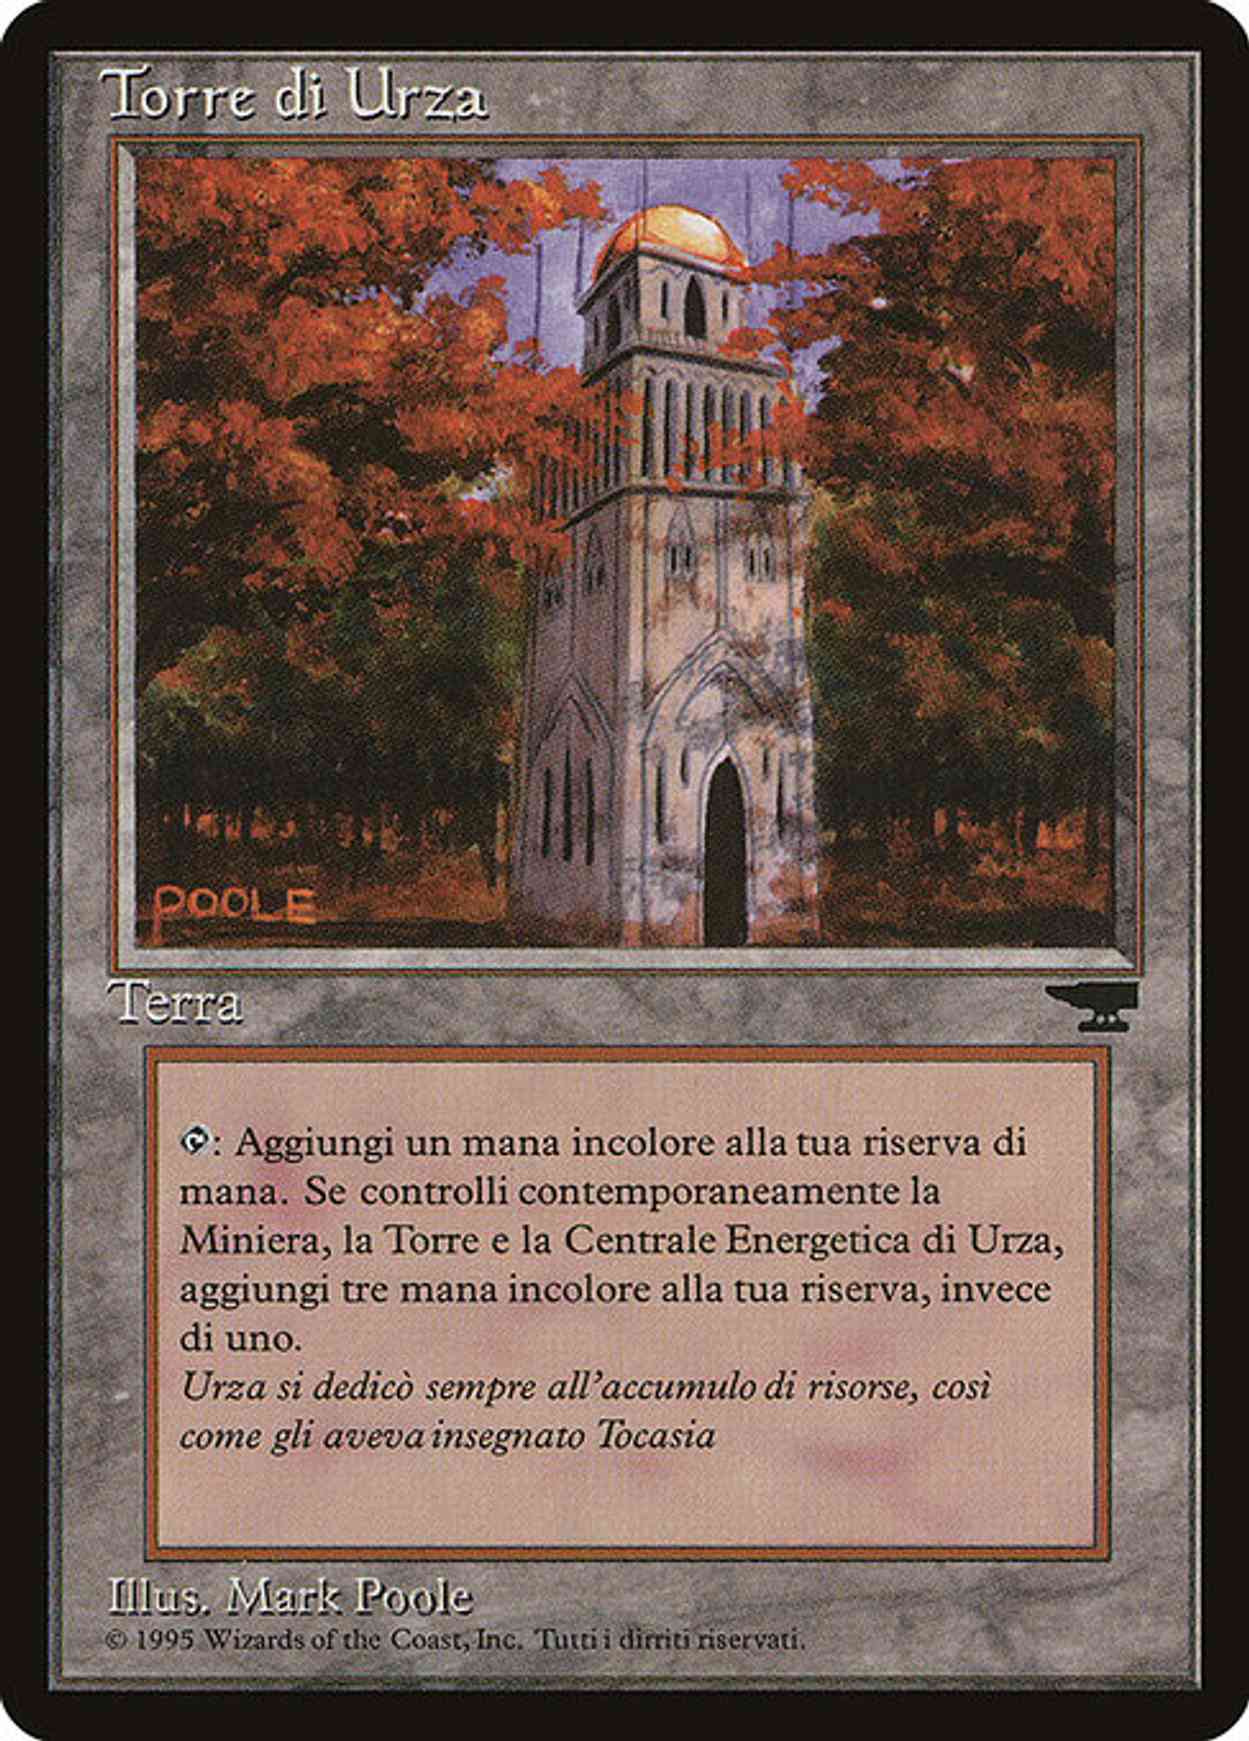 Urza's Tower (Forest) (Italian) - "Torre di Urza" magic card front